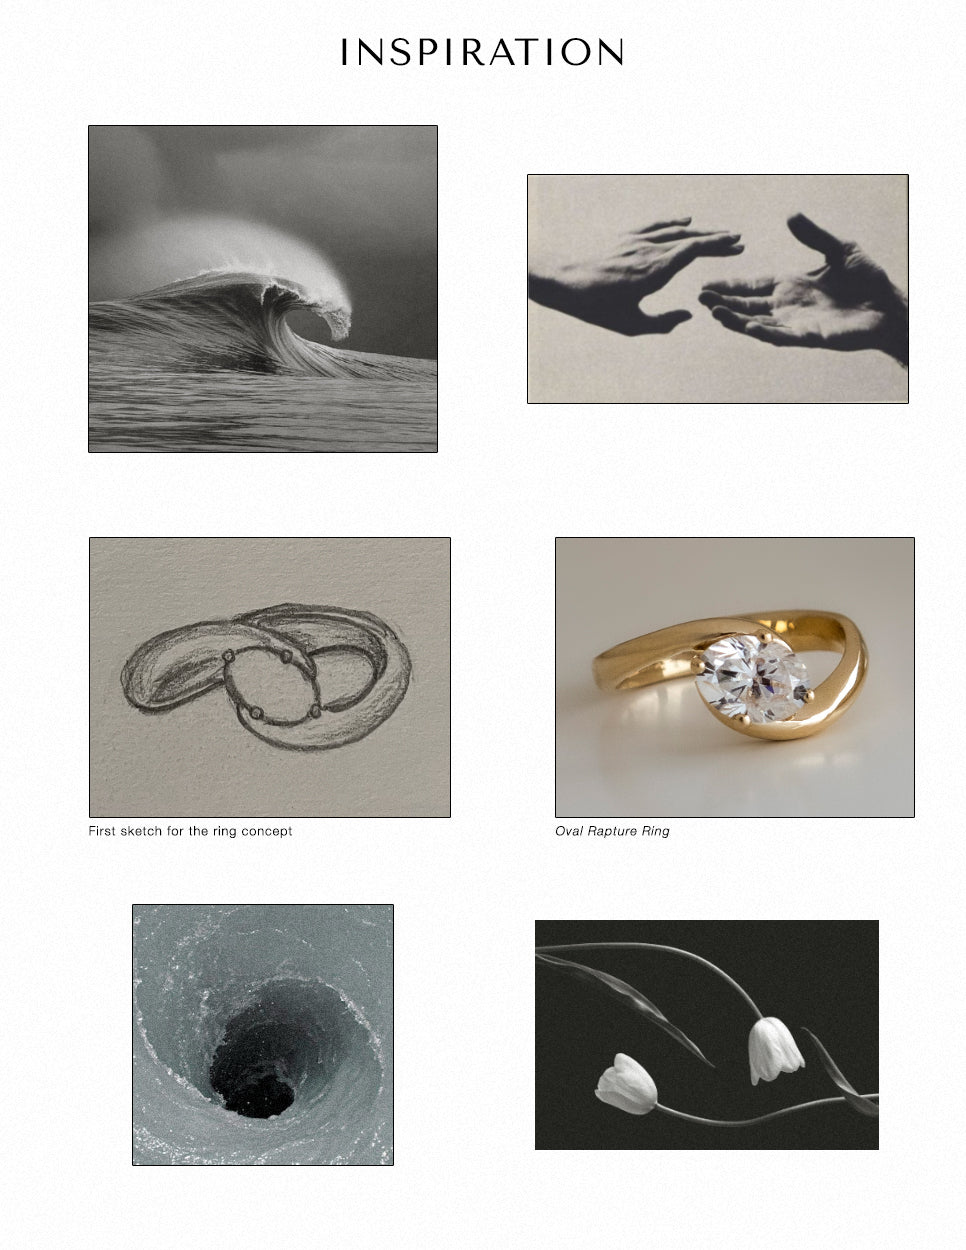 Oval Rapture Ring